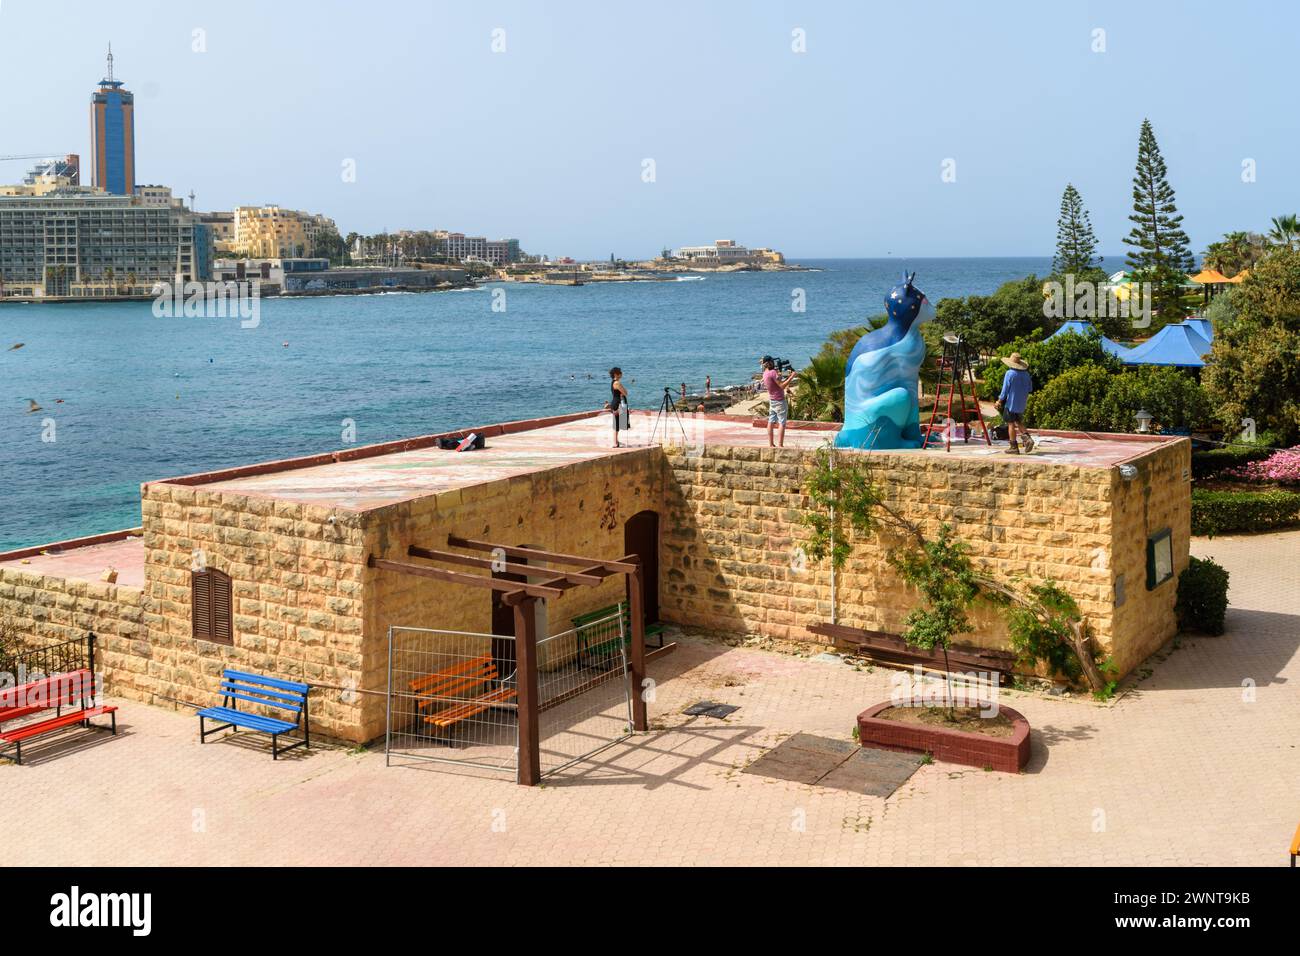 Gnien Indipendenza, Sliema, Malta - May 16th 2020: The cat sculpture created by Matthew Pandolfino getting a new coat of paint in Independence Garden. Stock Photo